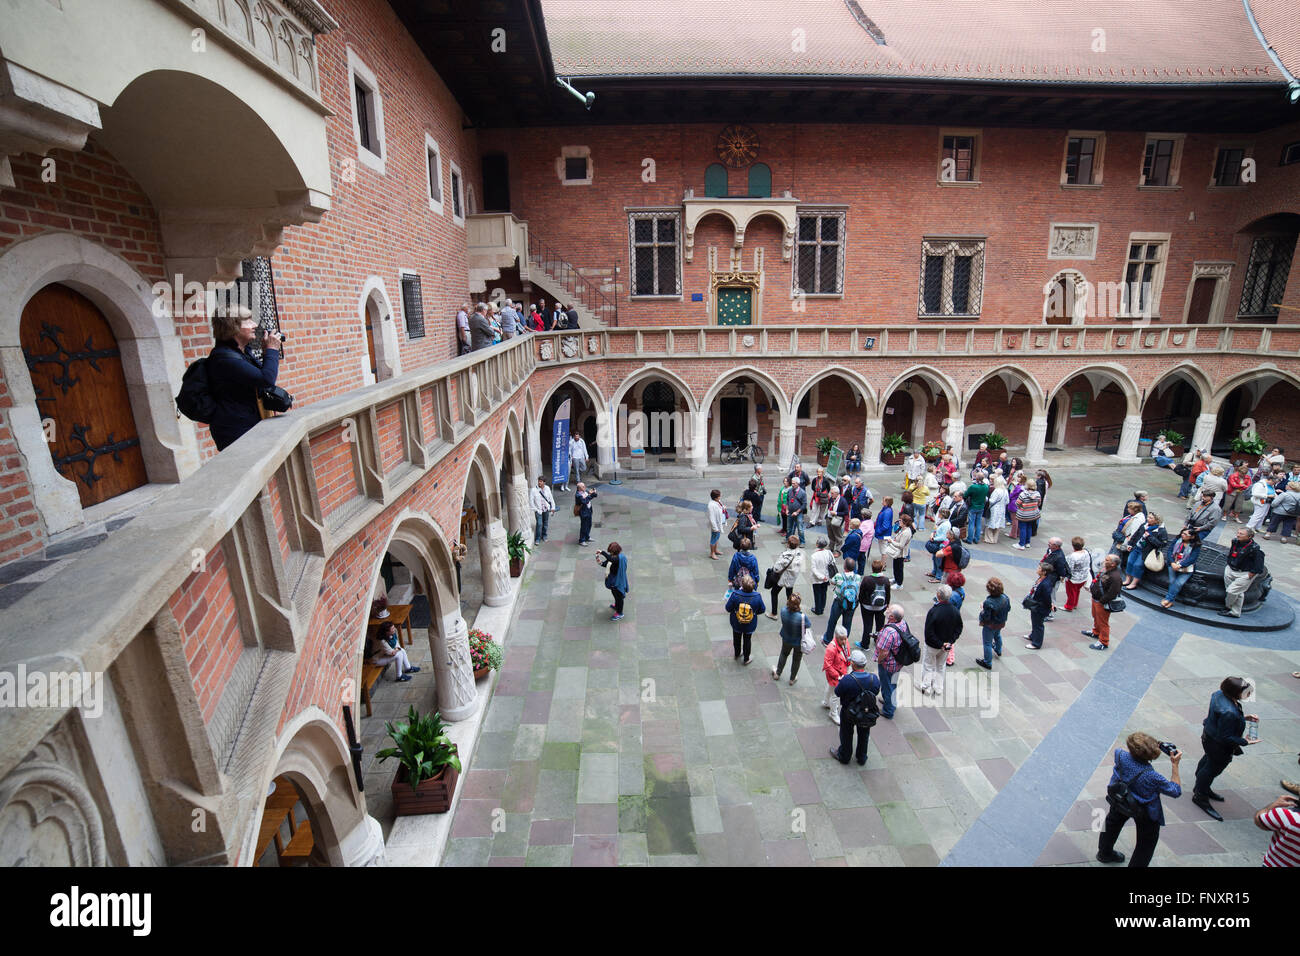 Poland, Krakow (Cracow), Collegium Maius (Great College) of Jagiellonian University, museum, group of tourists on sightseeing to Stock Photo